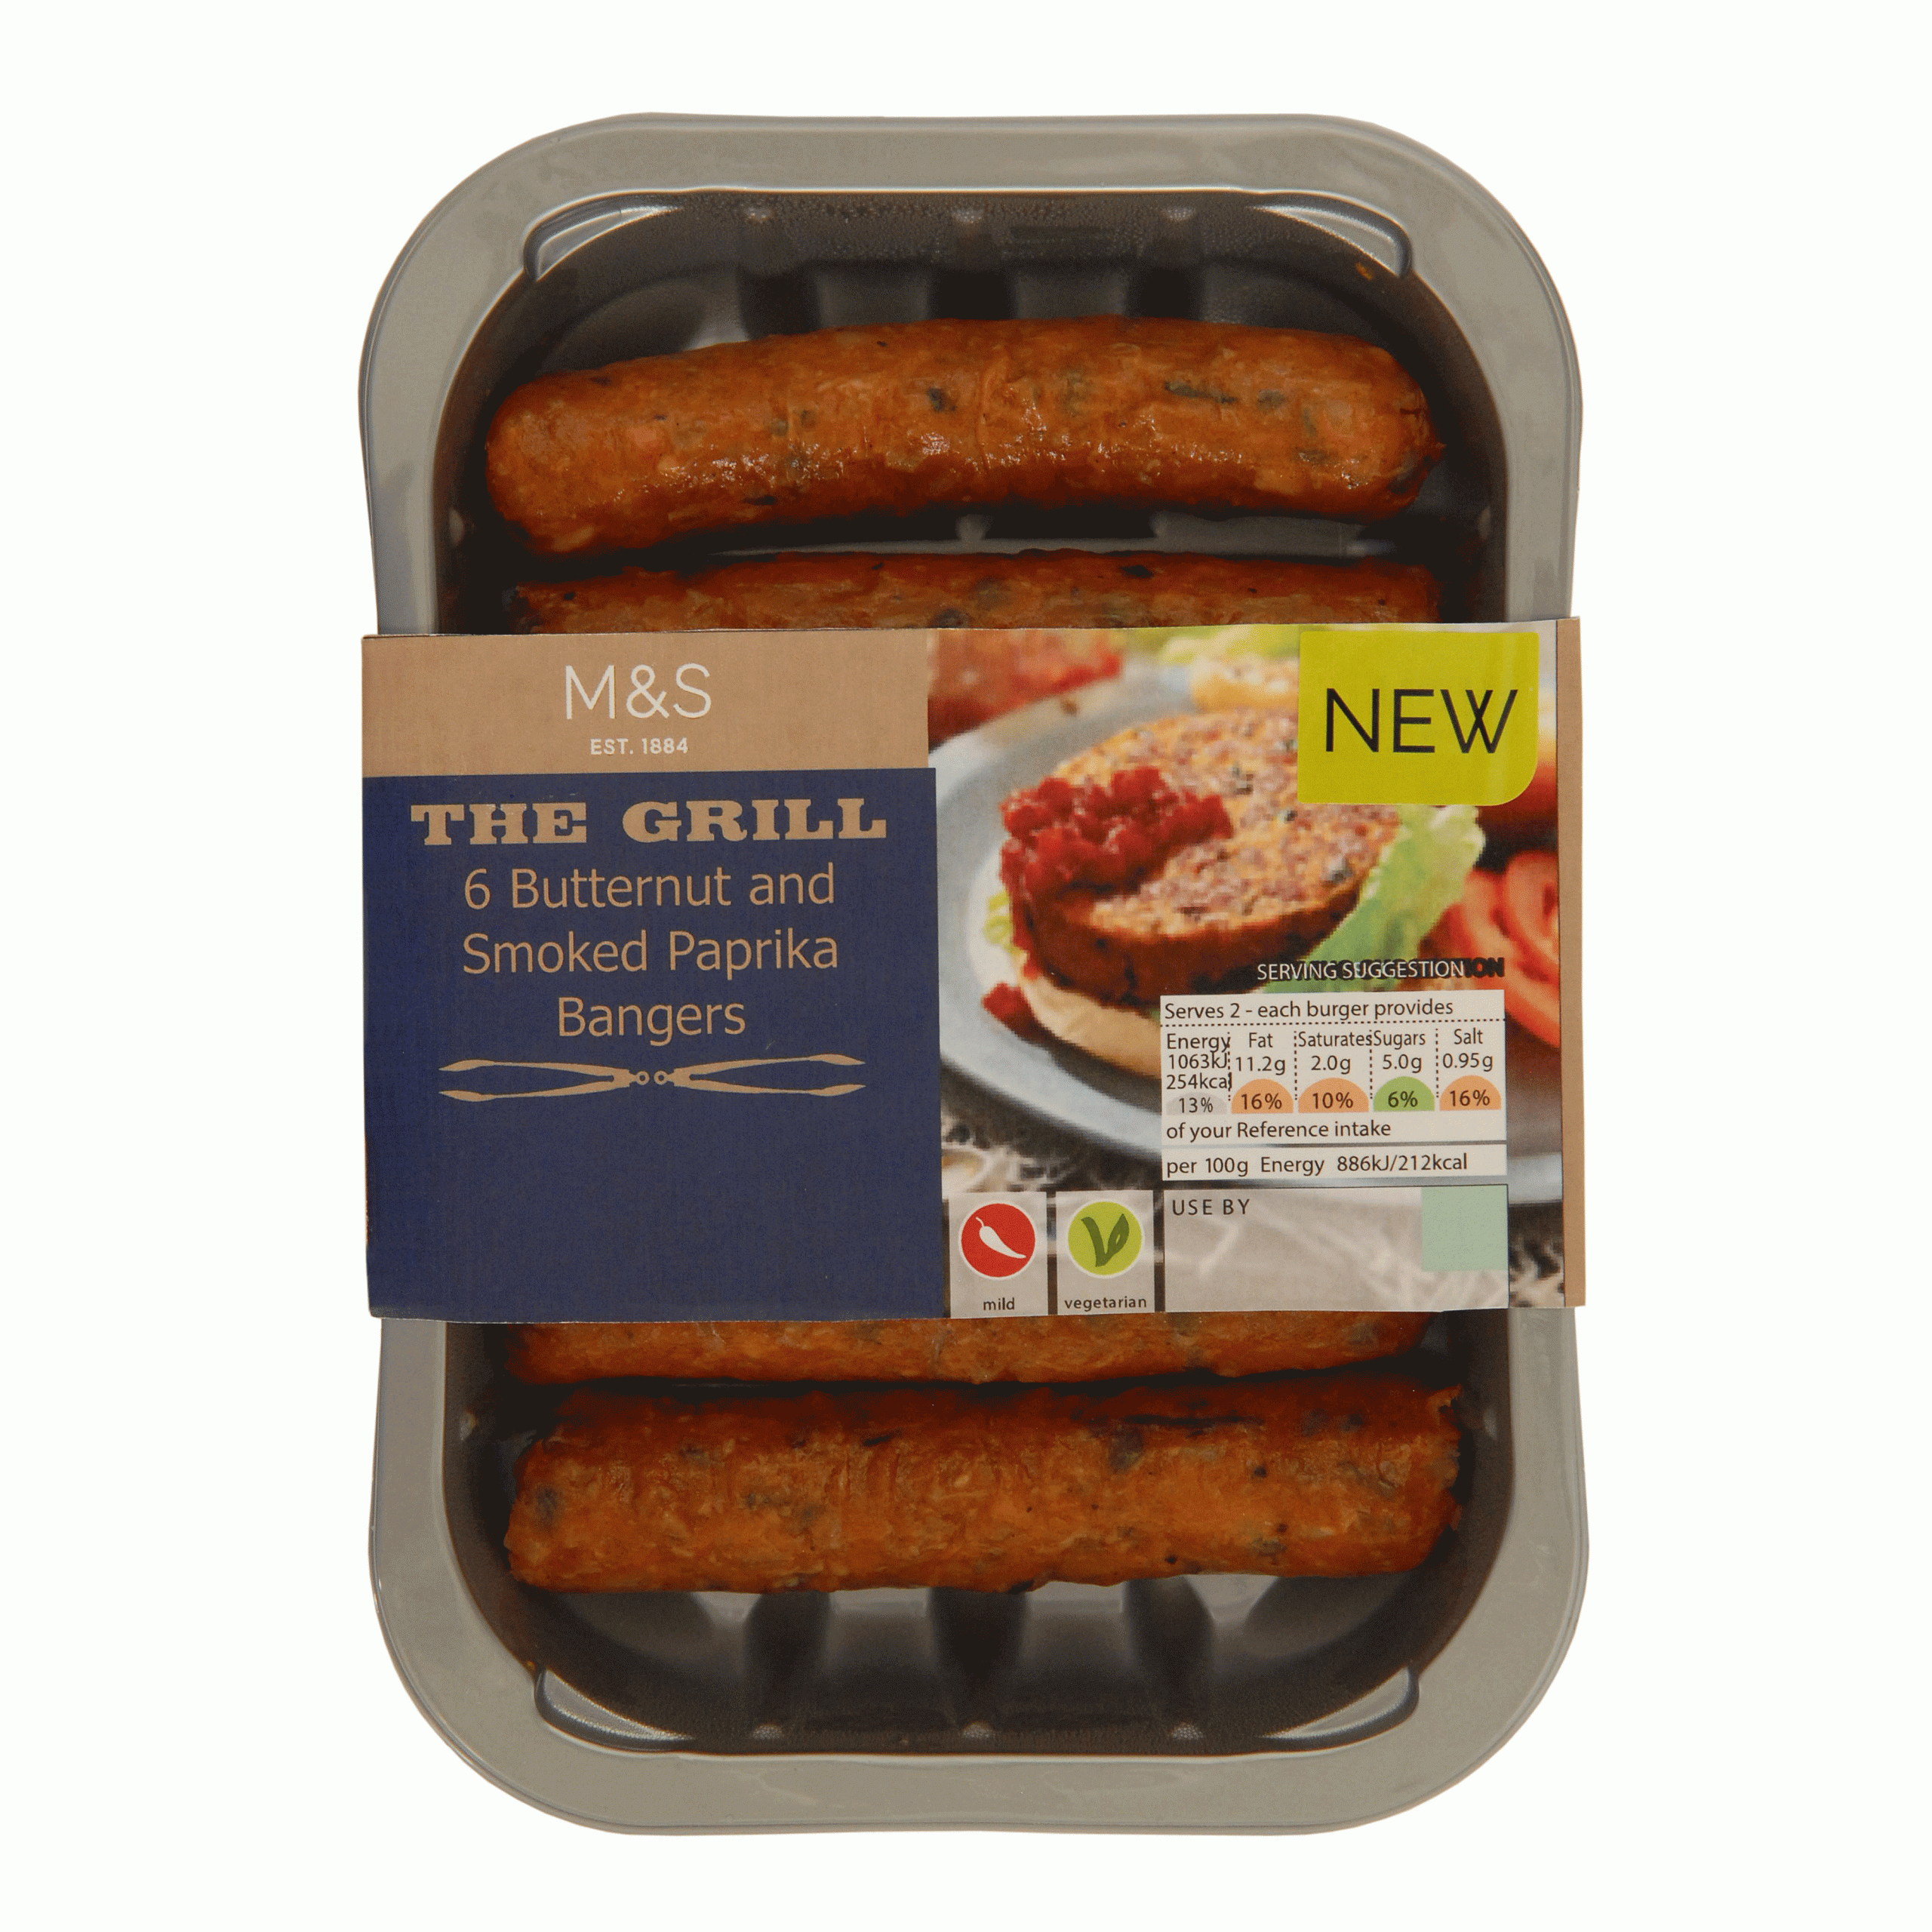 M&S's Butternut and Smoked Paprika Bangers